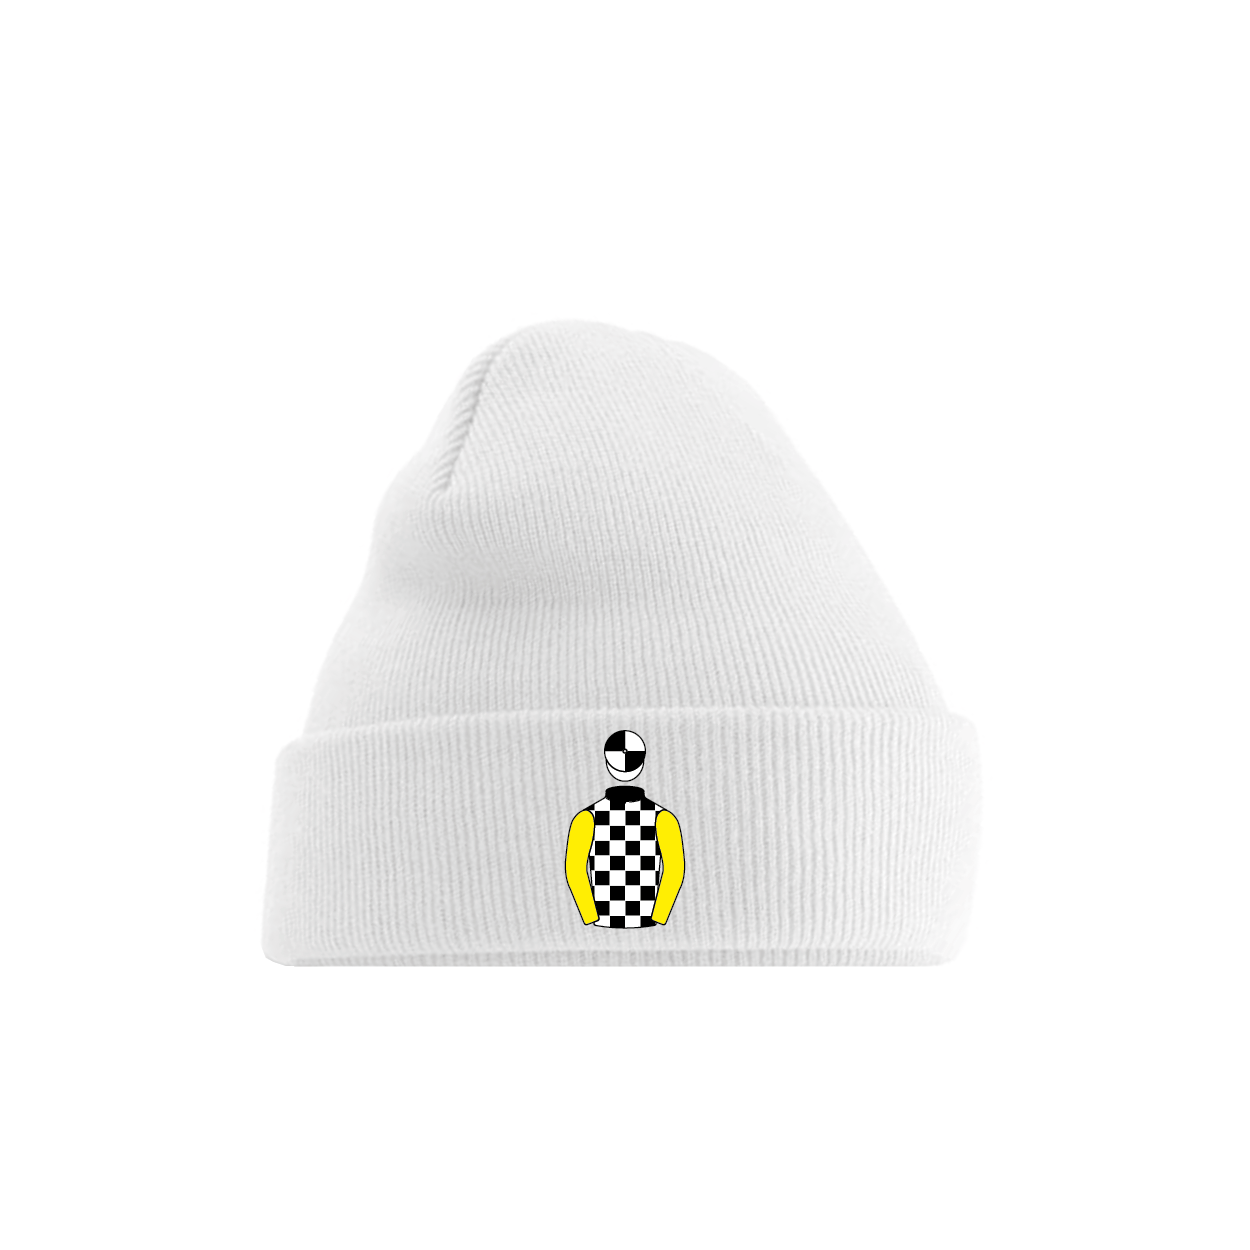 Malcolm C Denmark Embroidered Cuffed Beanie - Hacked Up